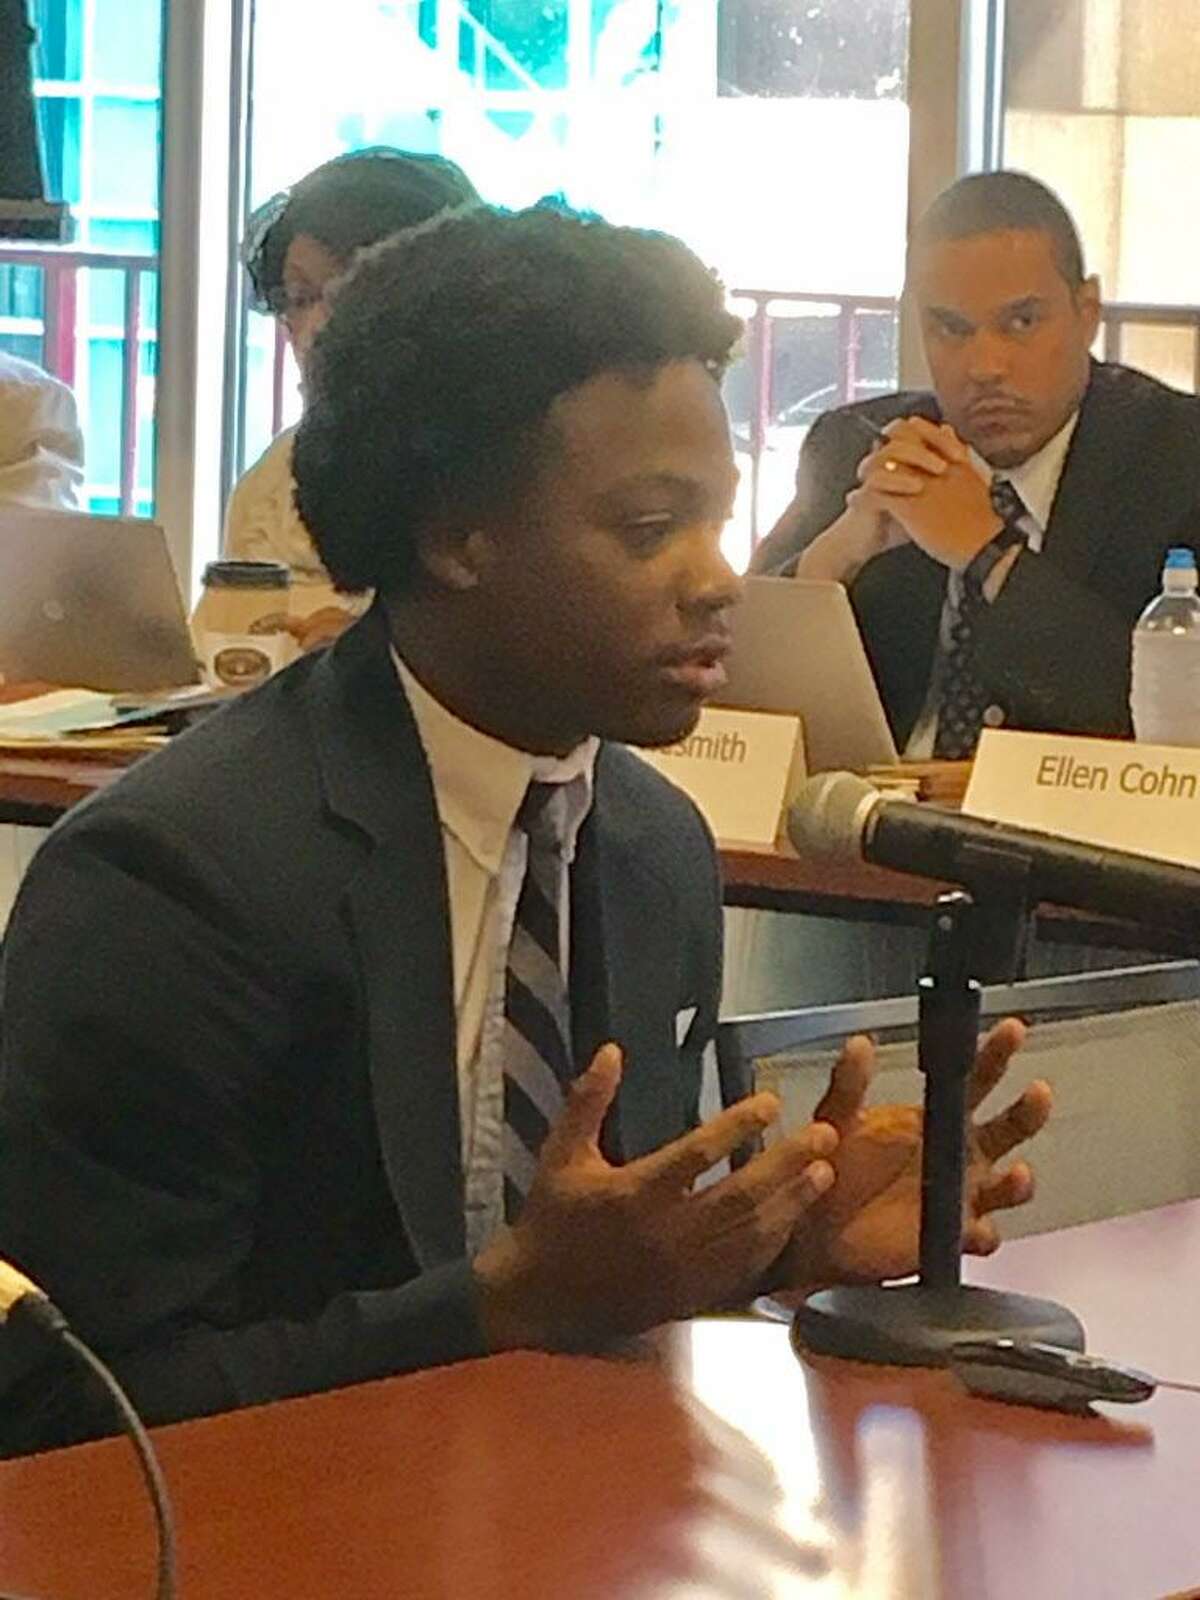 A Capital Prep Harbor student tells State Board of Education his school should expand